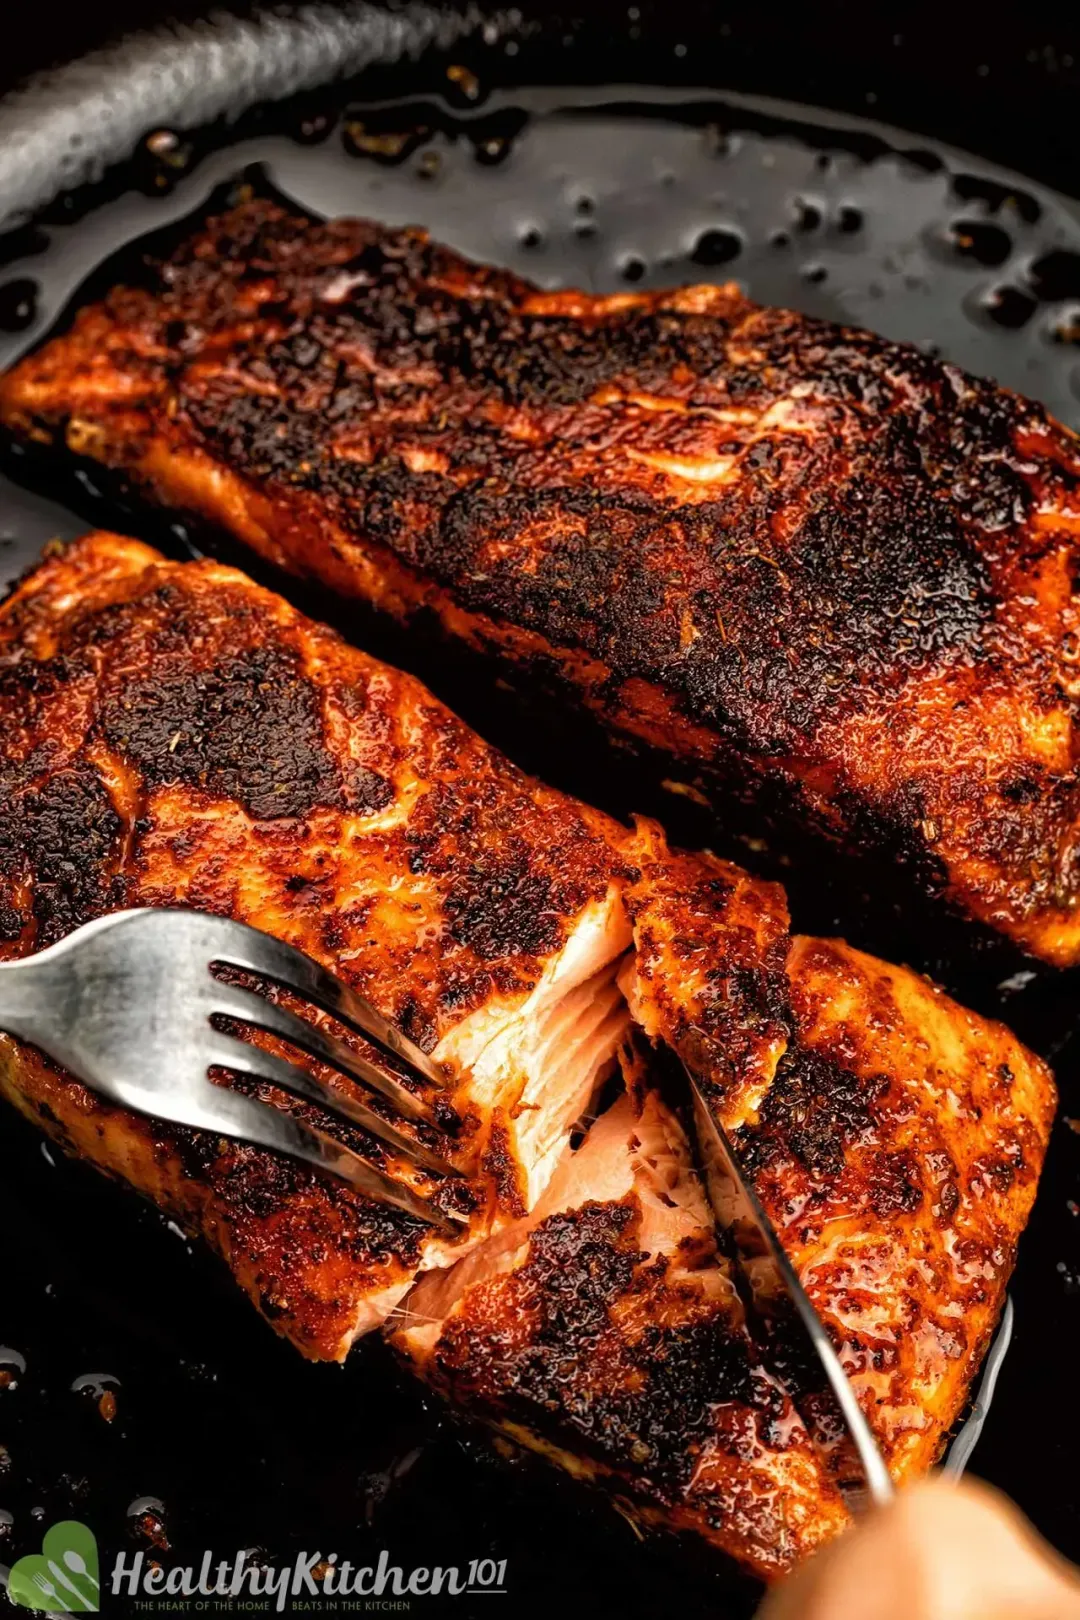 A close up picture of a fork and a knife cutting one of the two blackened salmon fillets in a black skillet.